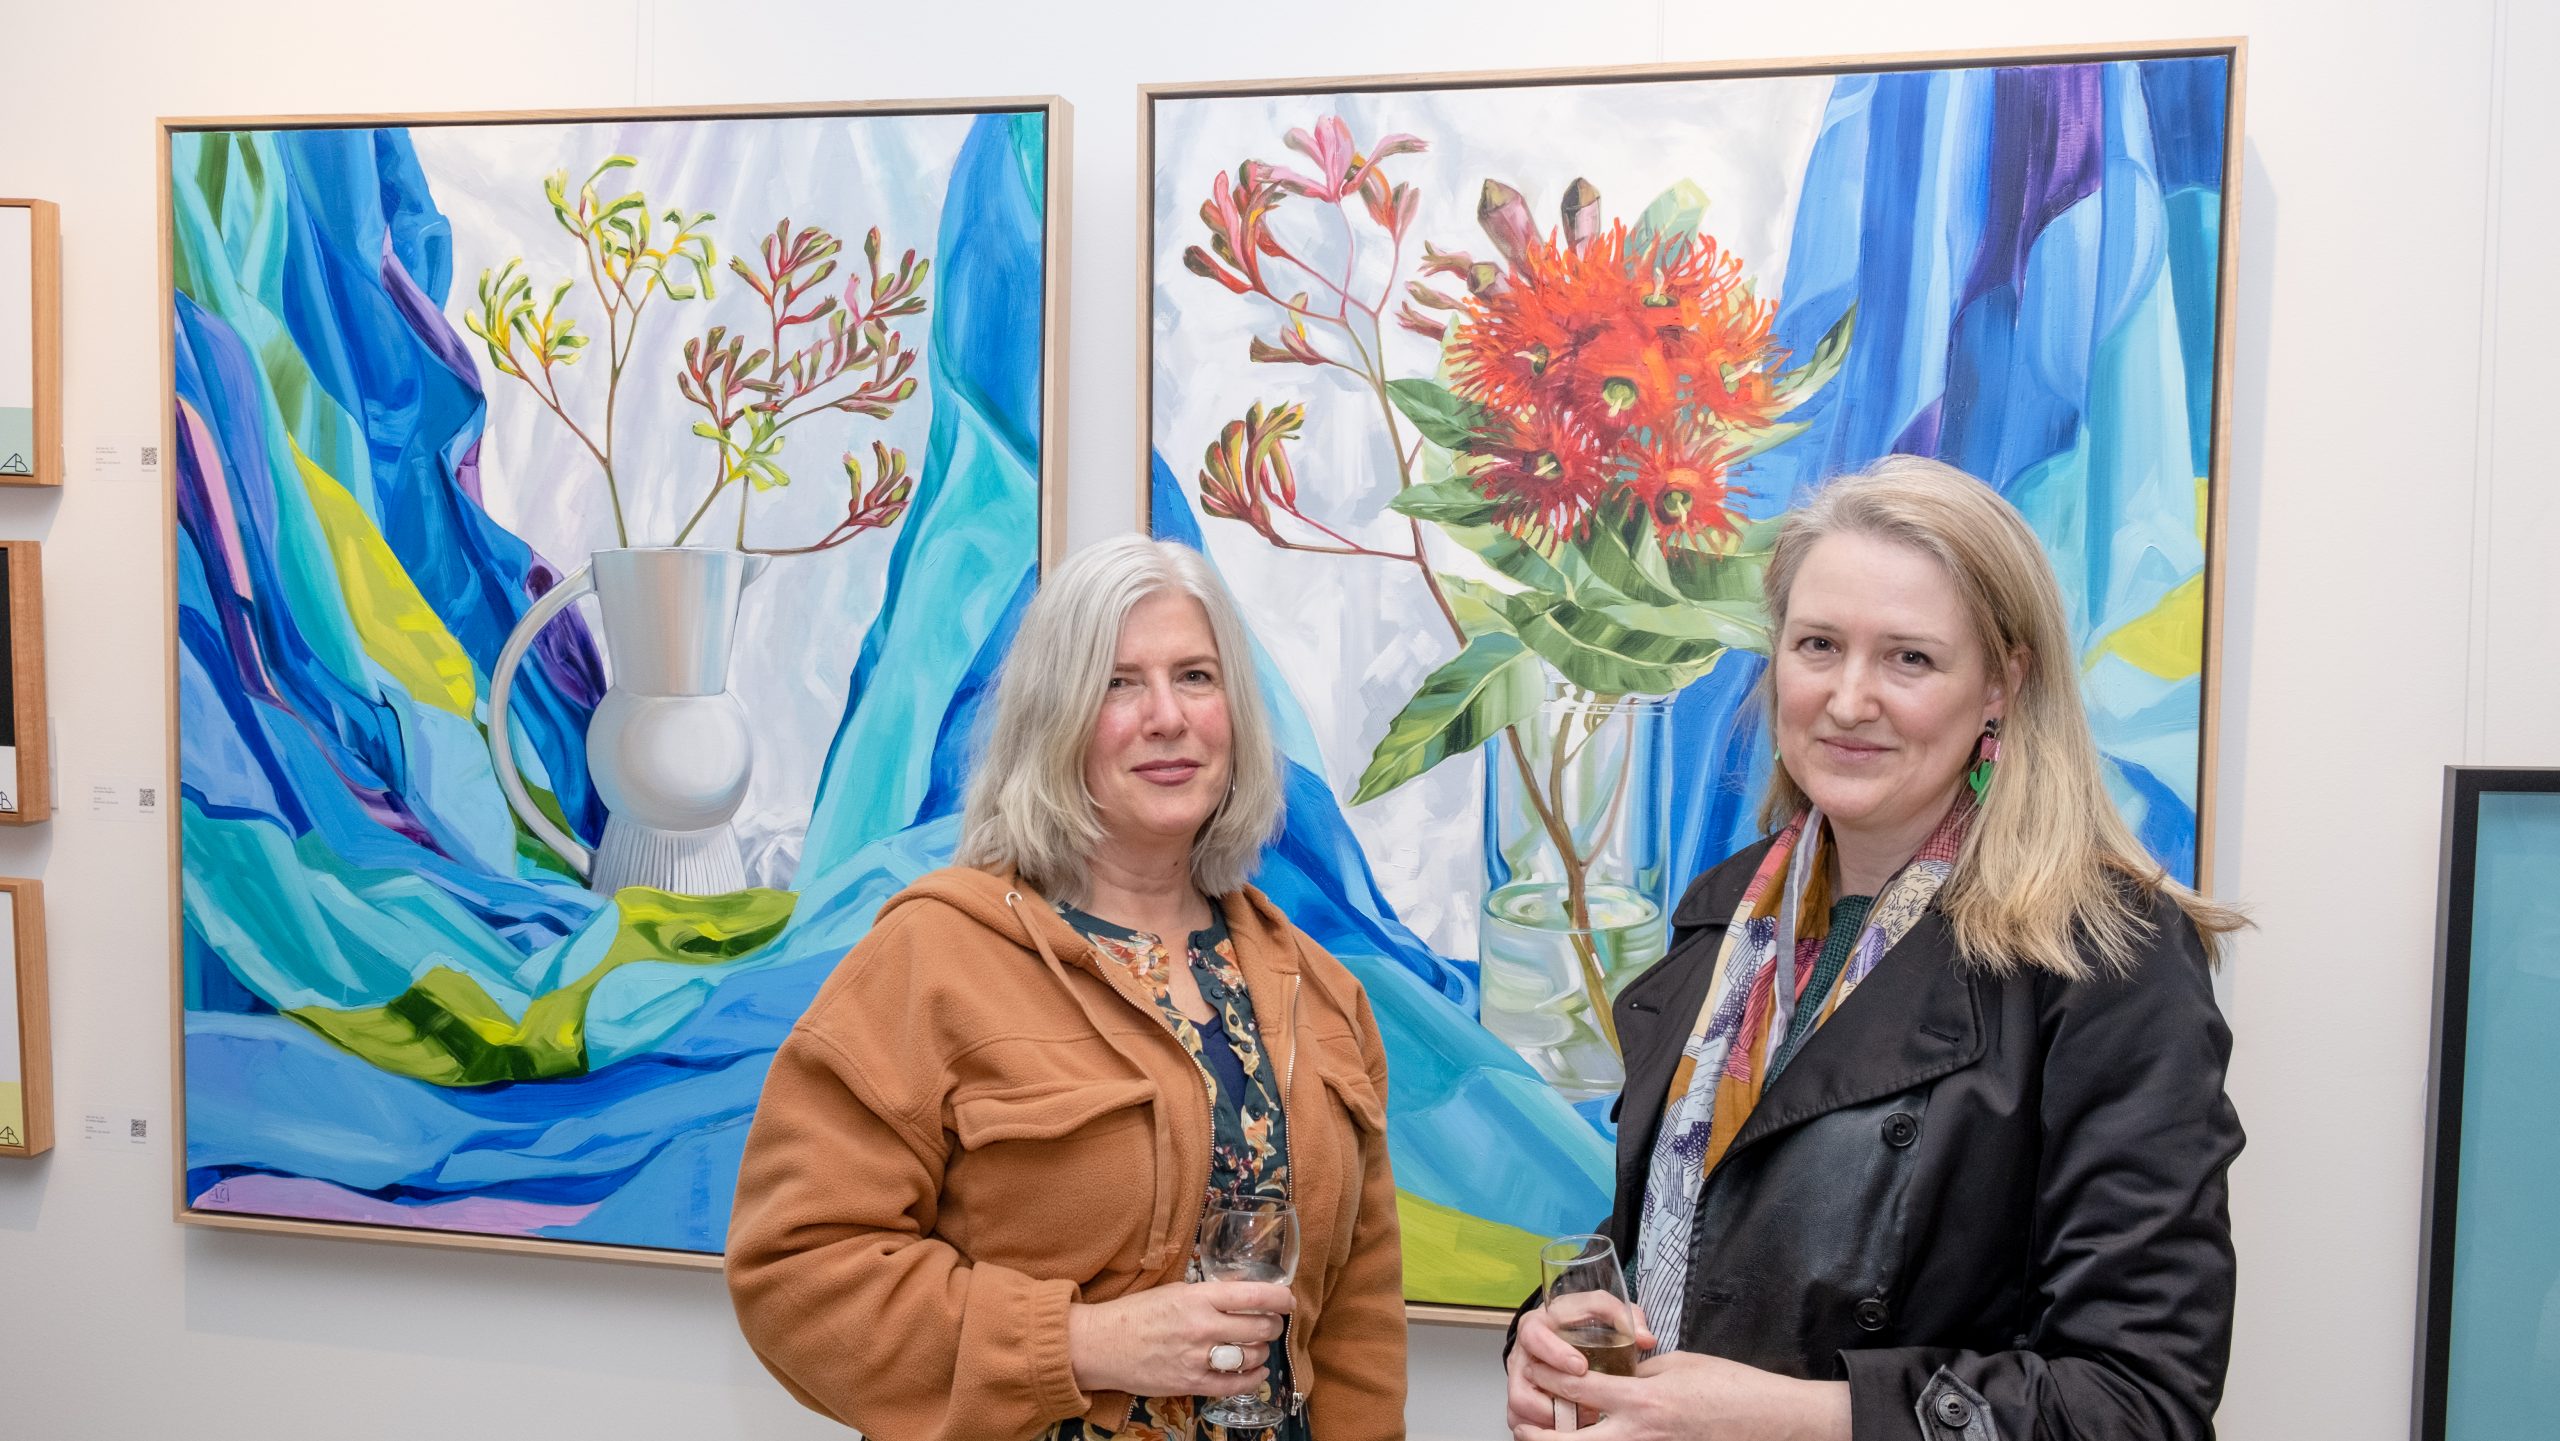 Bluethumb's Very Own Alicia Cornwell Attending and Posing With Her Very Own Art On Display On The Night. 